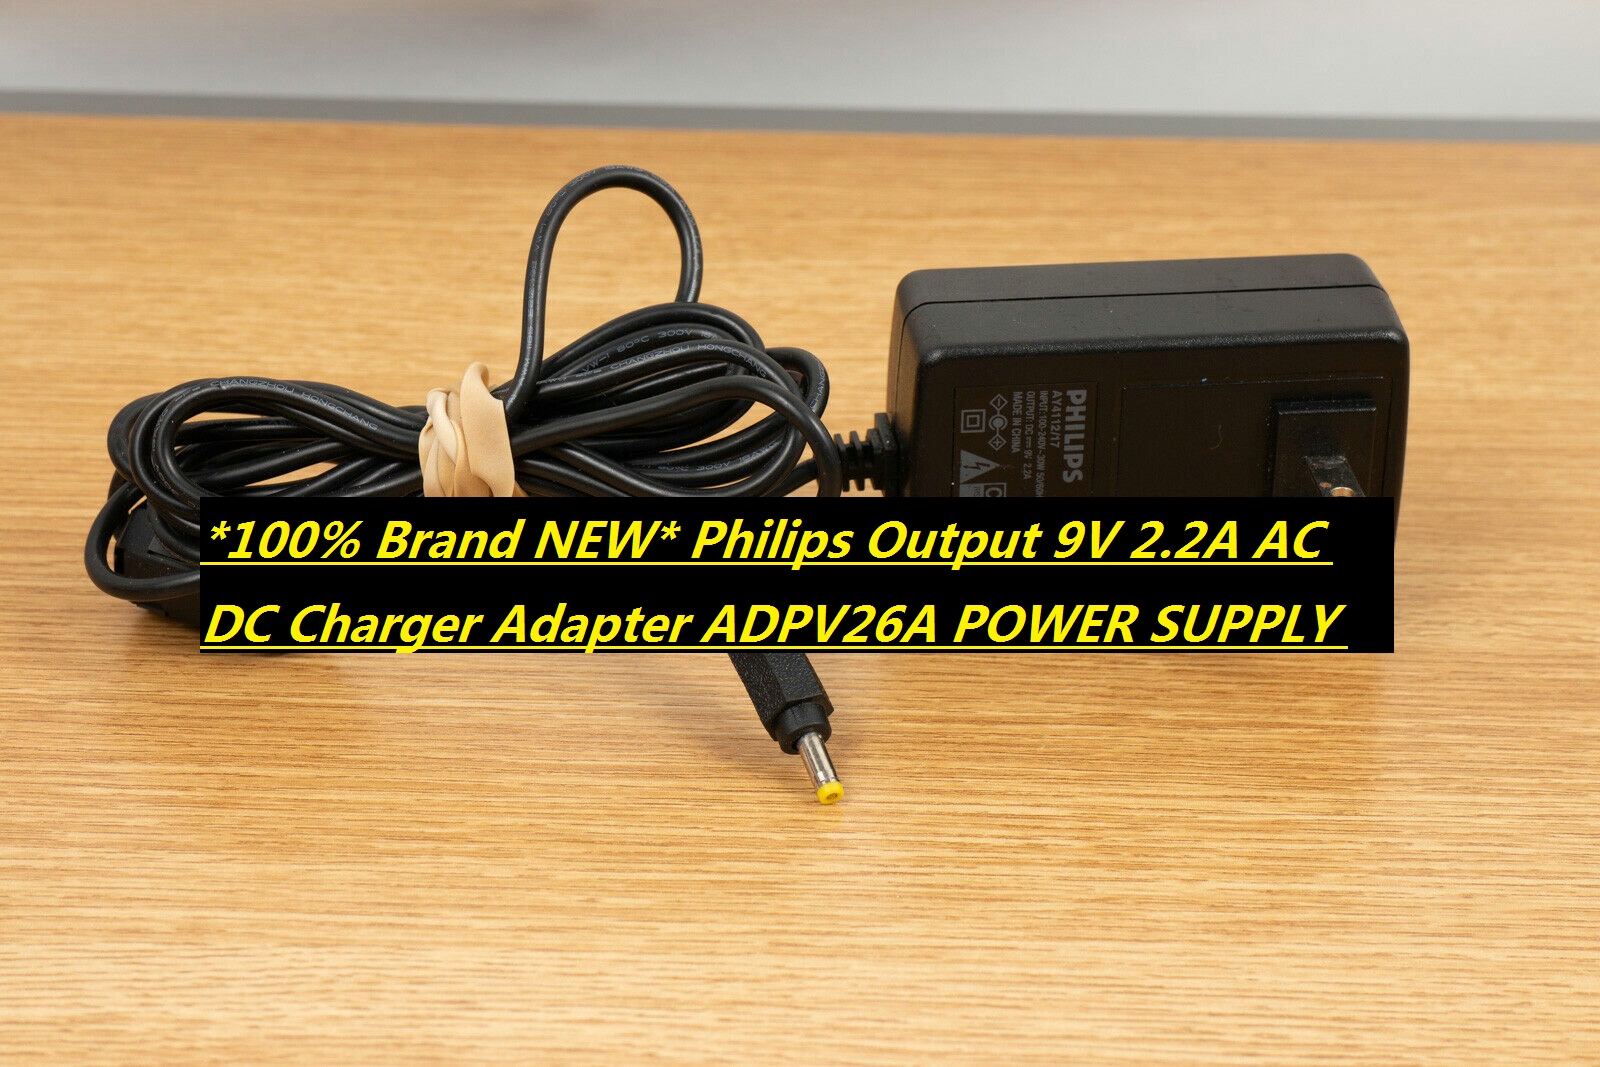 *100% Brand NEW* Philips Output 9V 2.2A AC DC Charger Adapter ADPV26A POWER SUPPLY